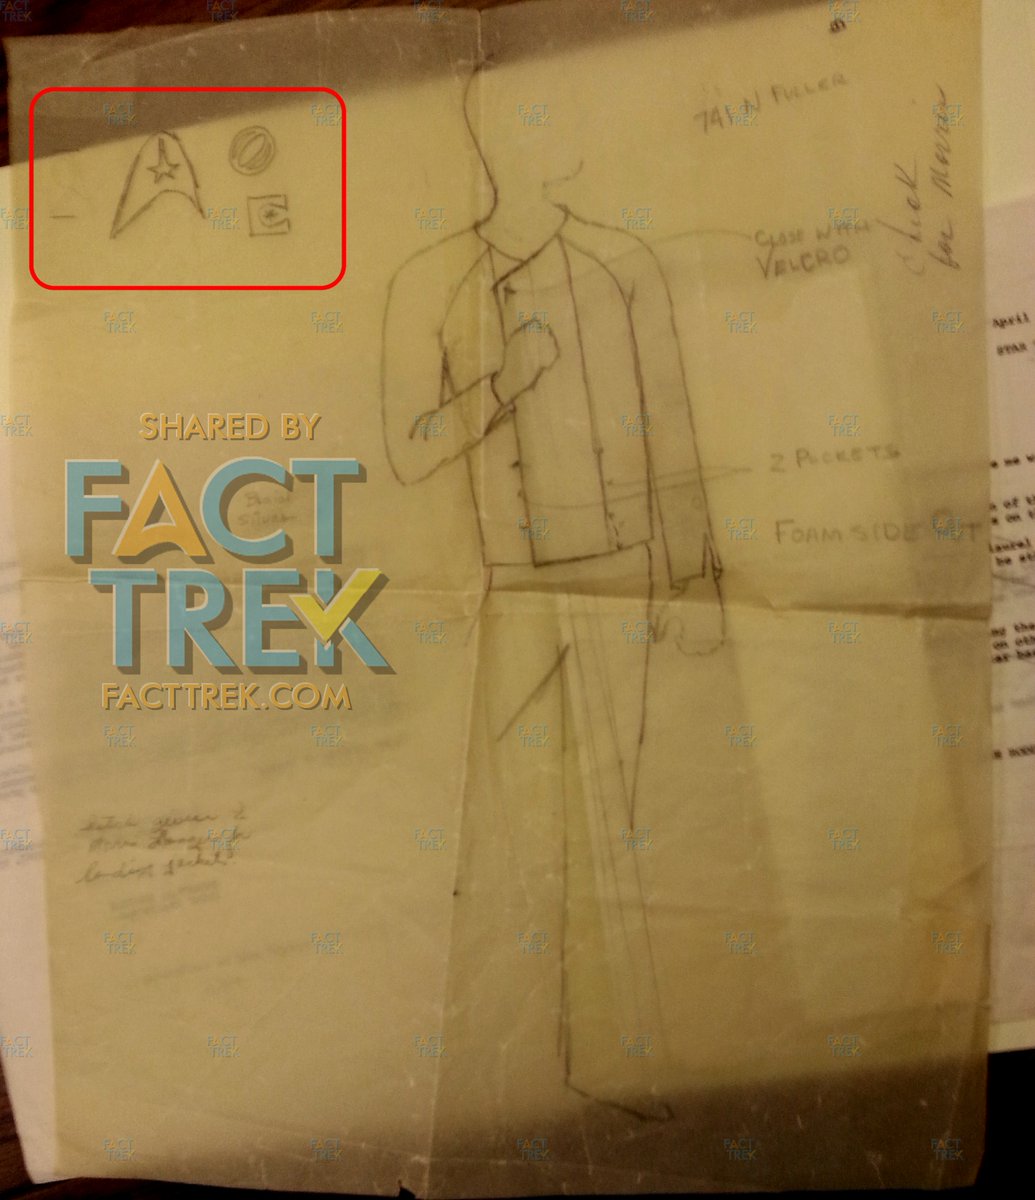  #StarTrek  ’s most distinctive emblem is the Starfleet arrowhead—which  #Roddenberry called “the Flying A” in one memo. We’ve found no record of who designed the emblem*, but it appears on this (late 1964**) sketch of the 1st pilot landing jackets by costume designer Bill Theiss.